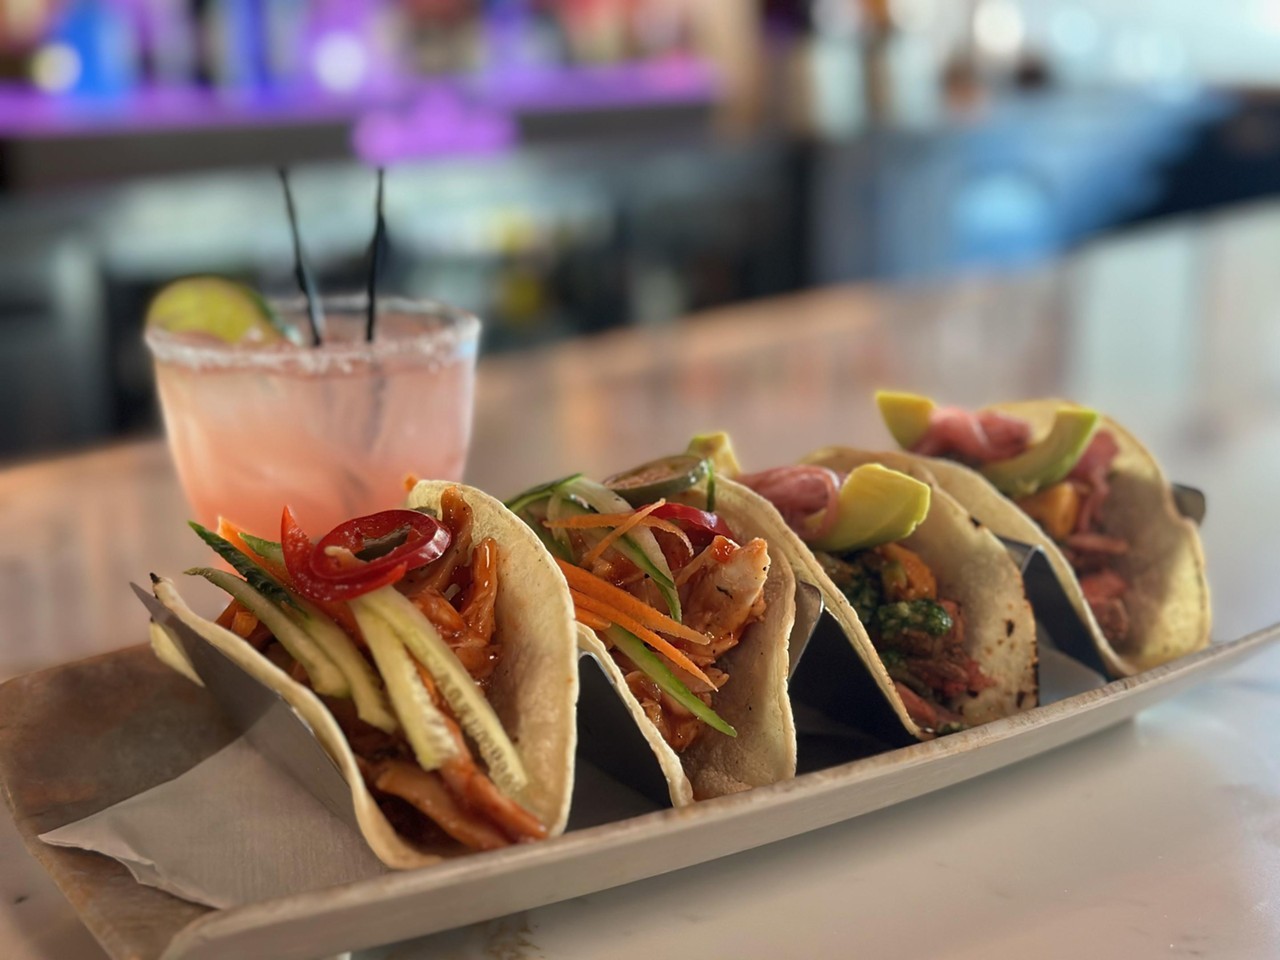 The Brinehouse
100 Main St. Suite 104, Safety Harbor
2 for $16 - Choice of Carne Asada Taco: Grilled Cumin & Garlic Brined Tri-Tip Steak , Avocado, Chimichurri Sauce, Pickled Red Onions & Tomatillo Salsa on Grilled Flour Tortilla OR
Bahn Mi Taco - Tamarind & Pineapple Marinated Pulled Chicken, Pickled Carrots & Cucumber Slaw, Jalapenos & Cilantro Hoisin Lime BBQ Sauce on a Grilled Flour Tortilla